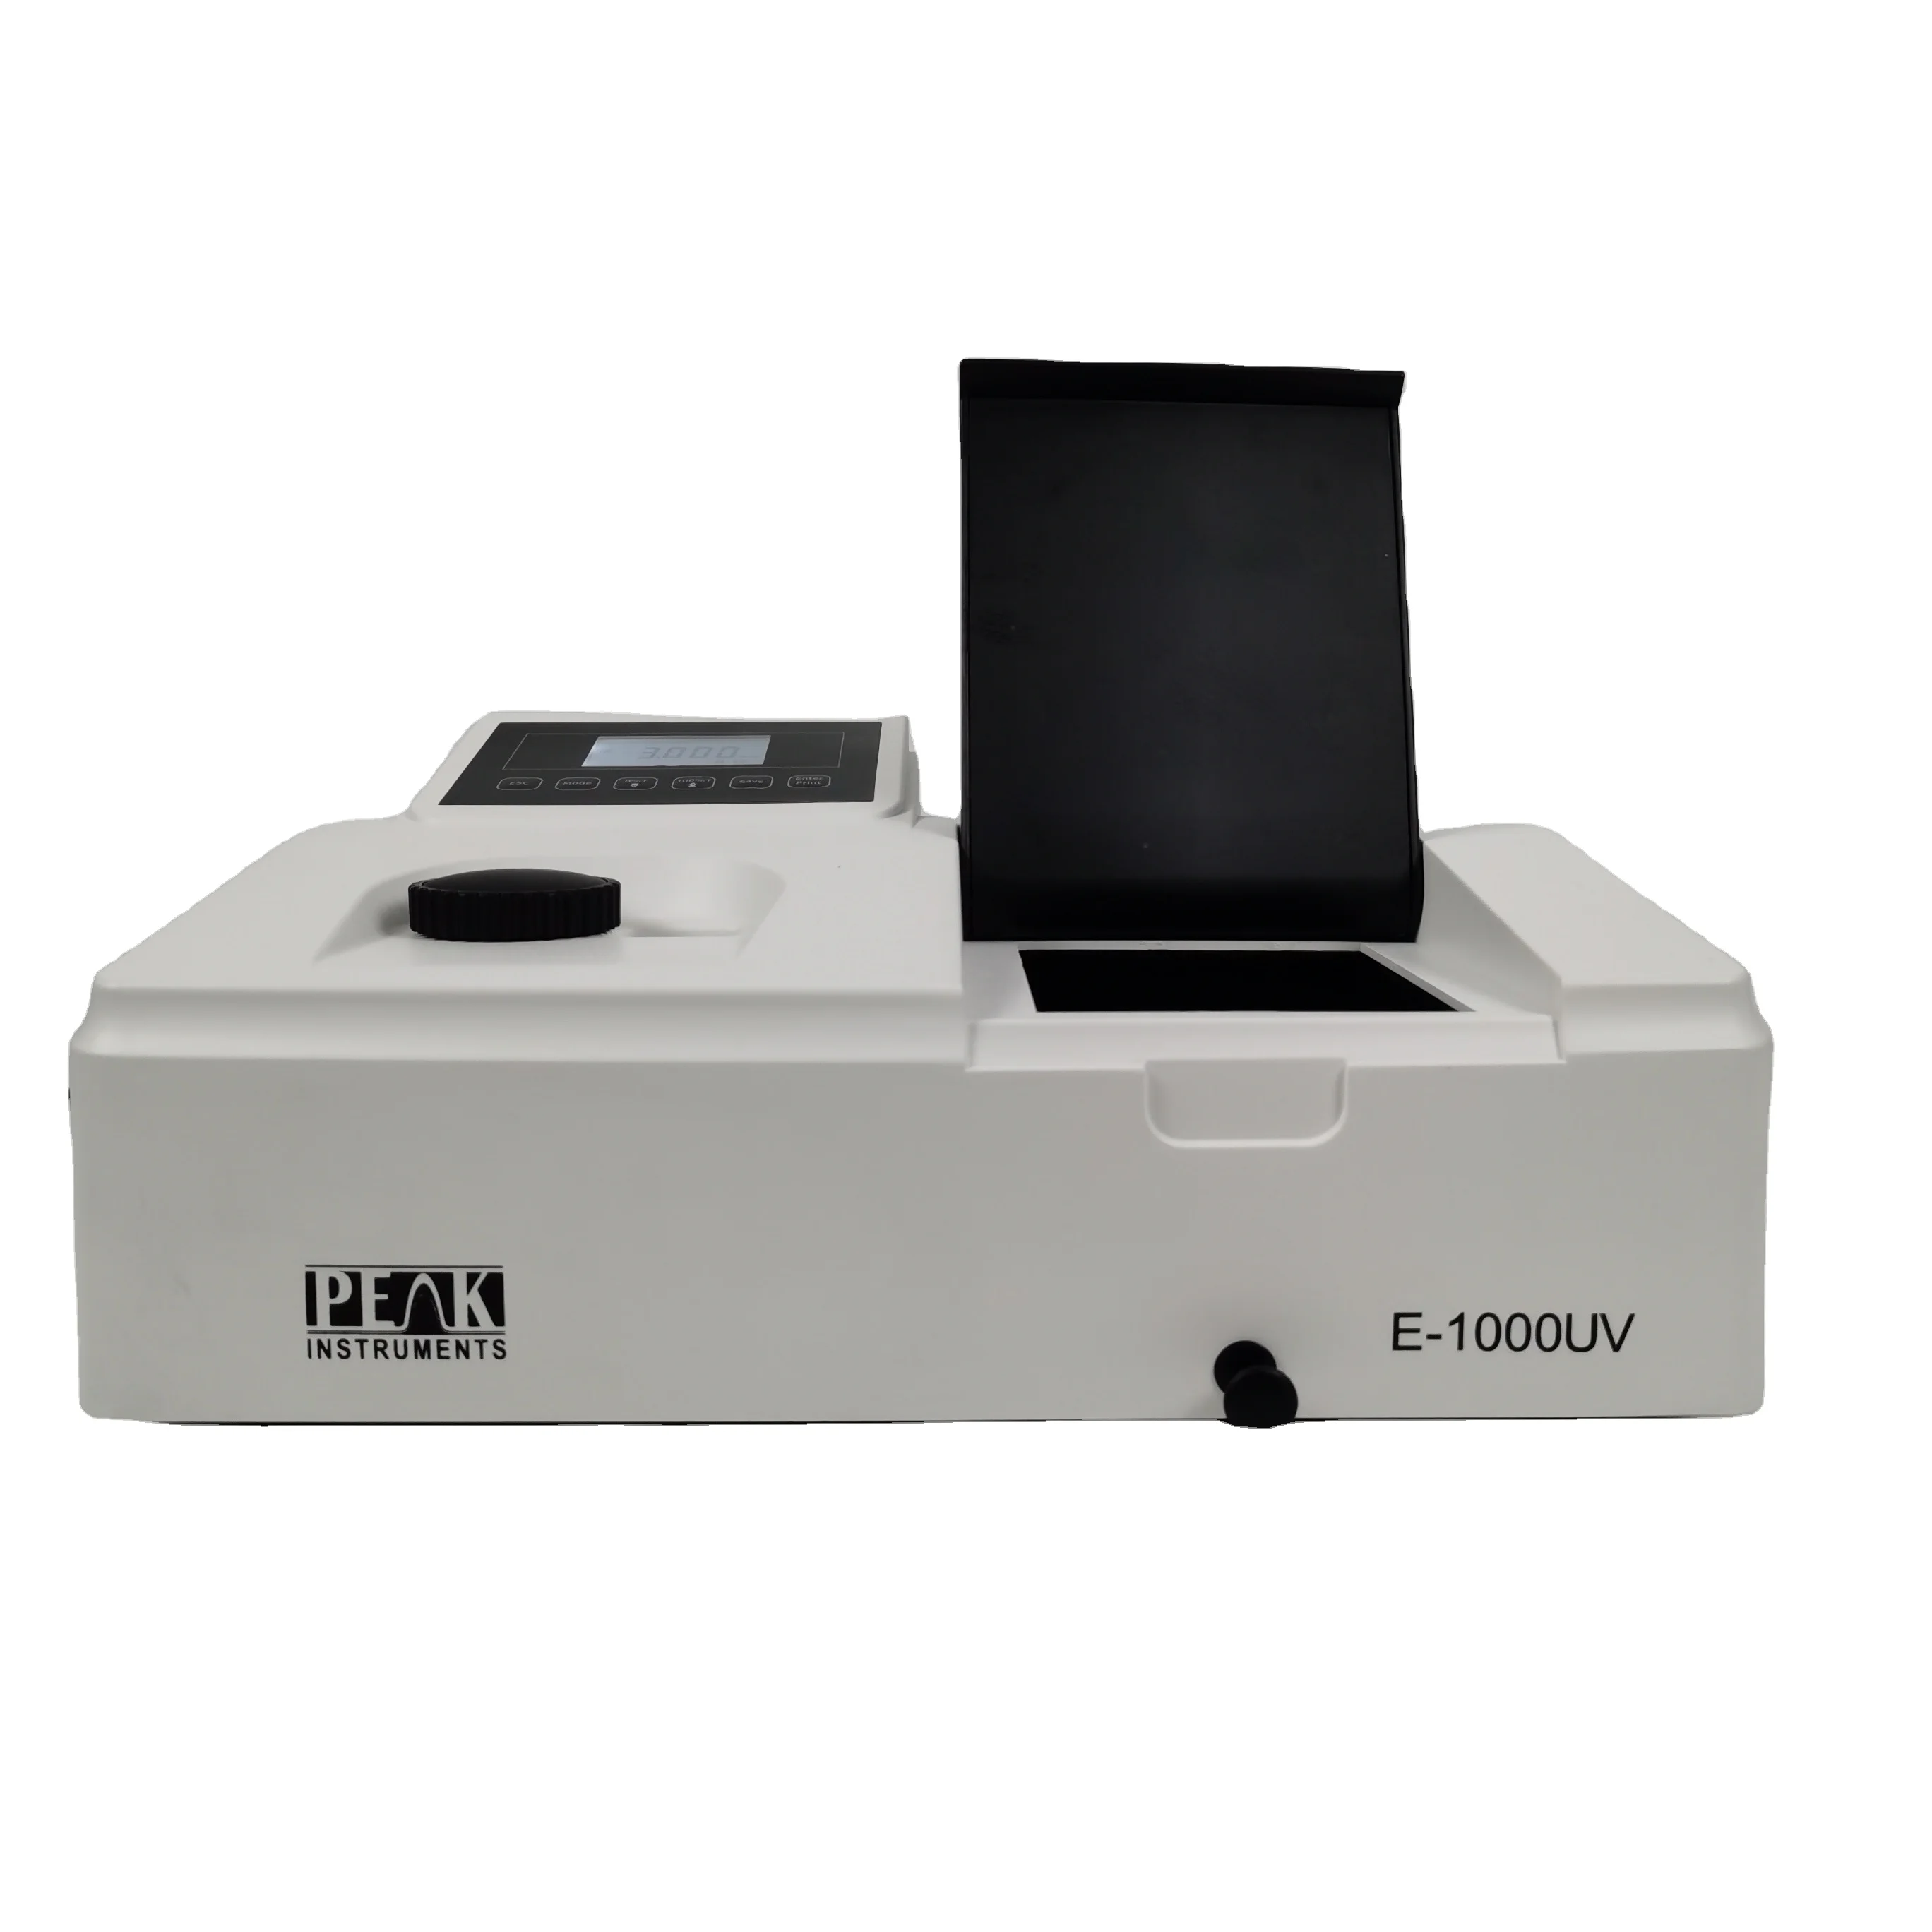 

Wholesale Photometer Low Price Manual Spectrometer 190-1020nm Uv Visible Spectrophotometer Device